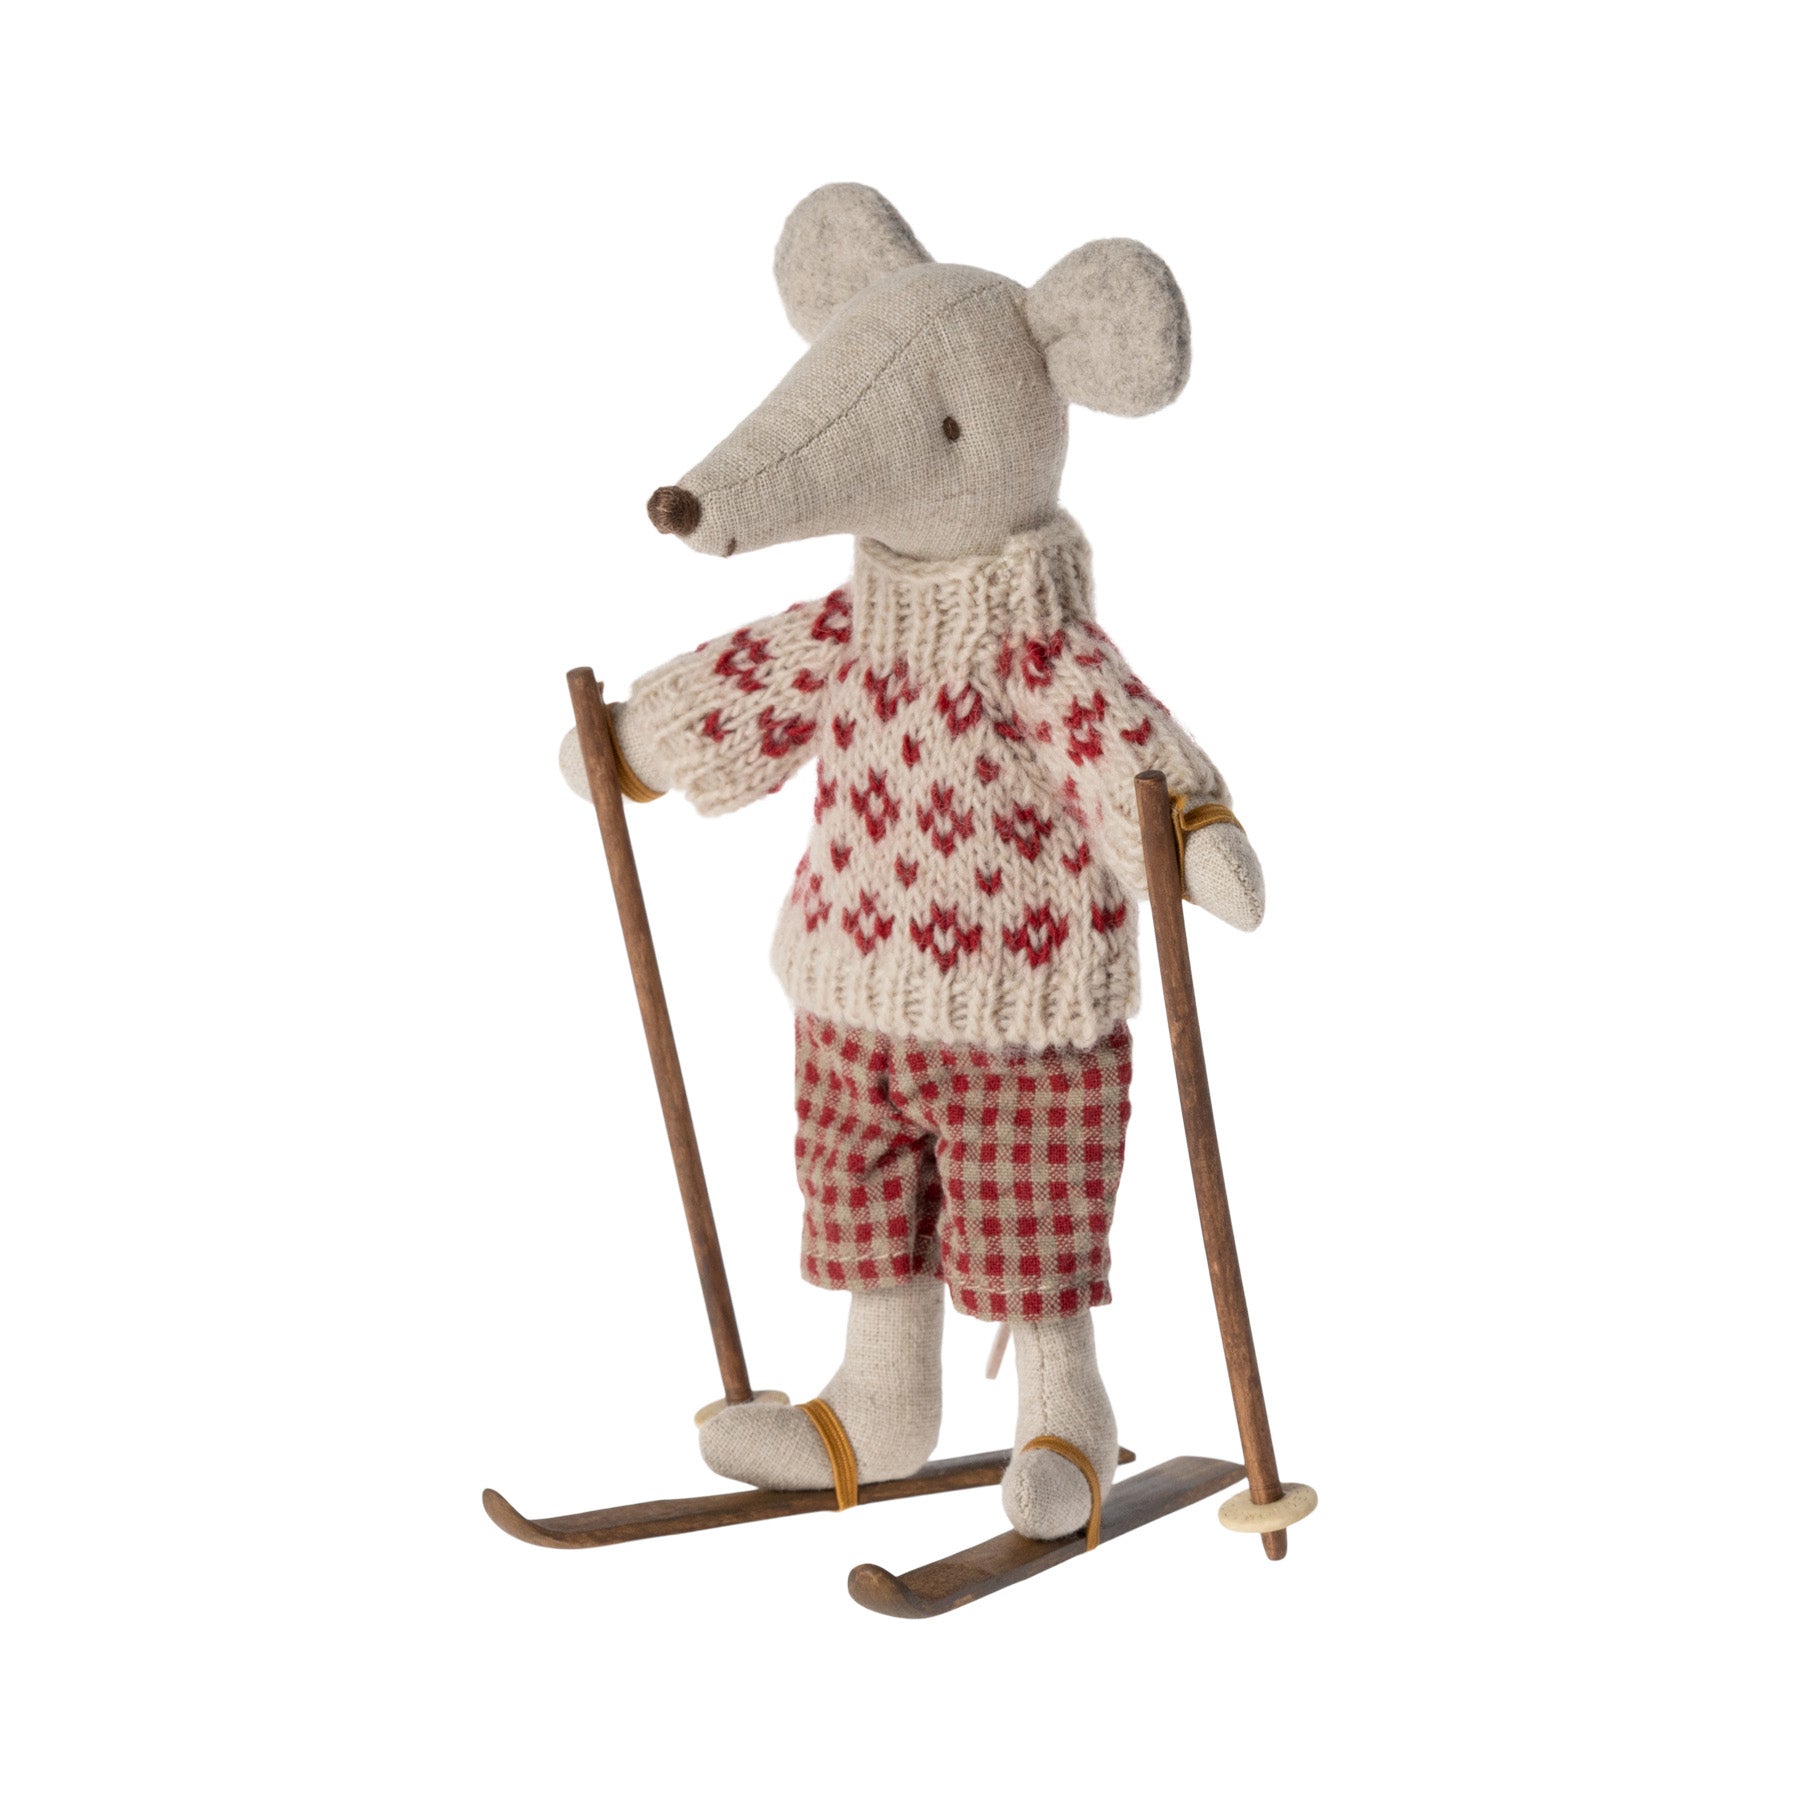 maileg mum mouse standing on wooden skis holding ski poles